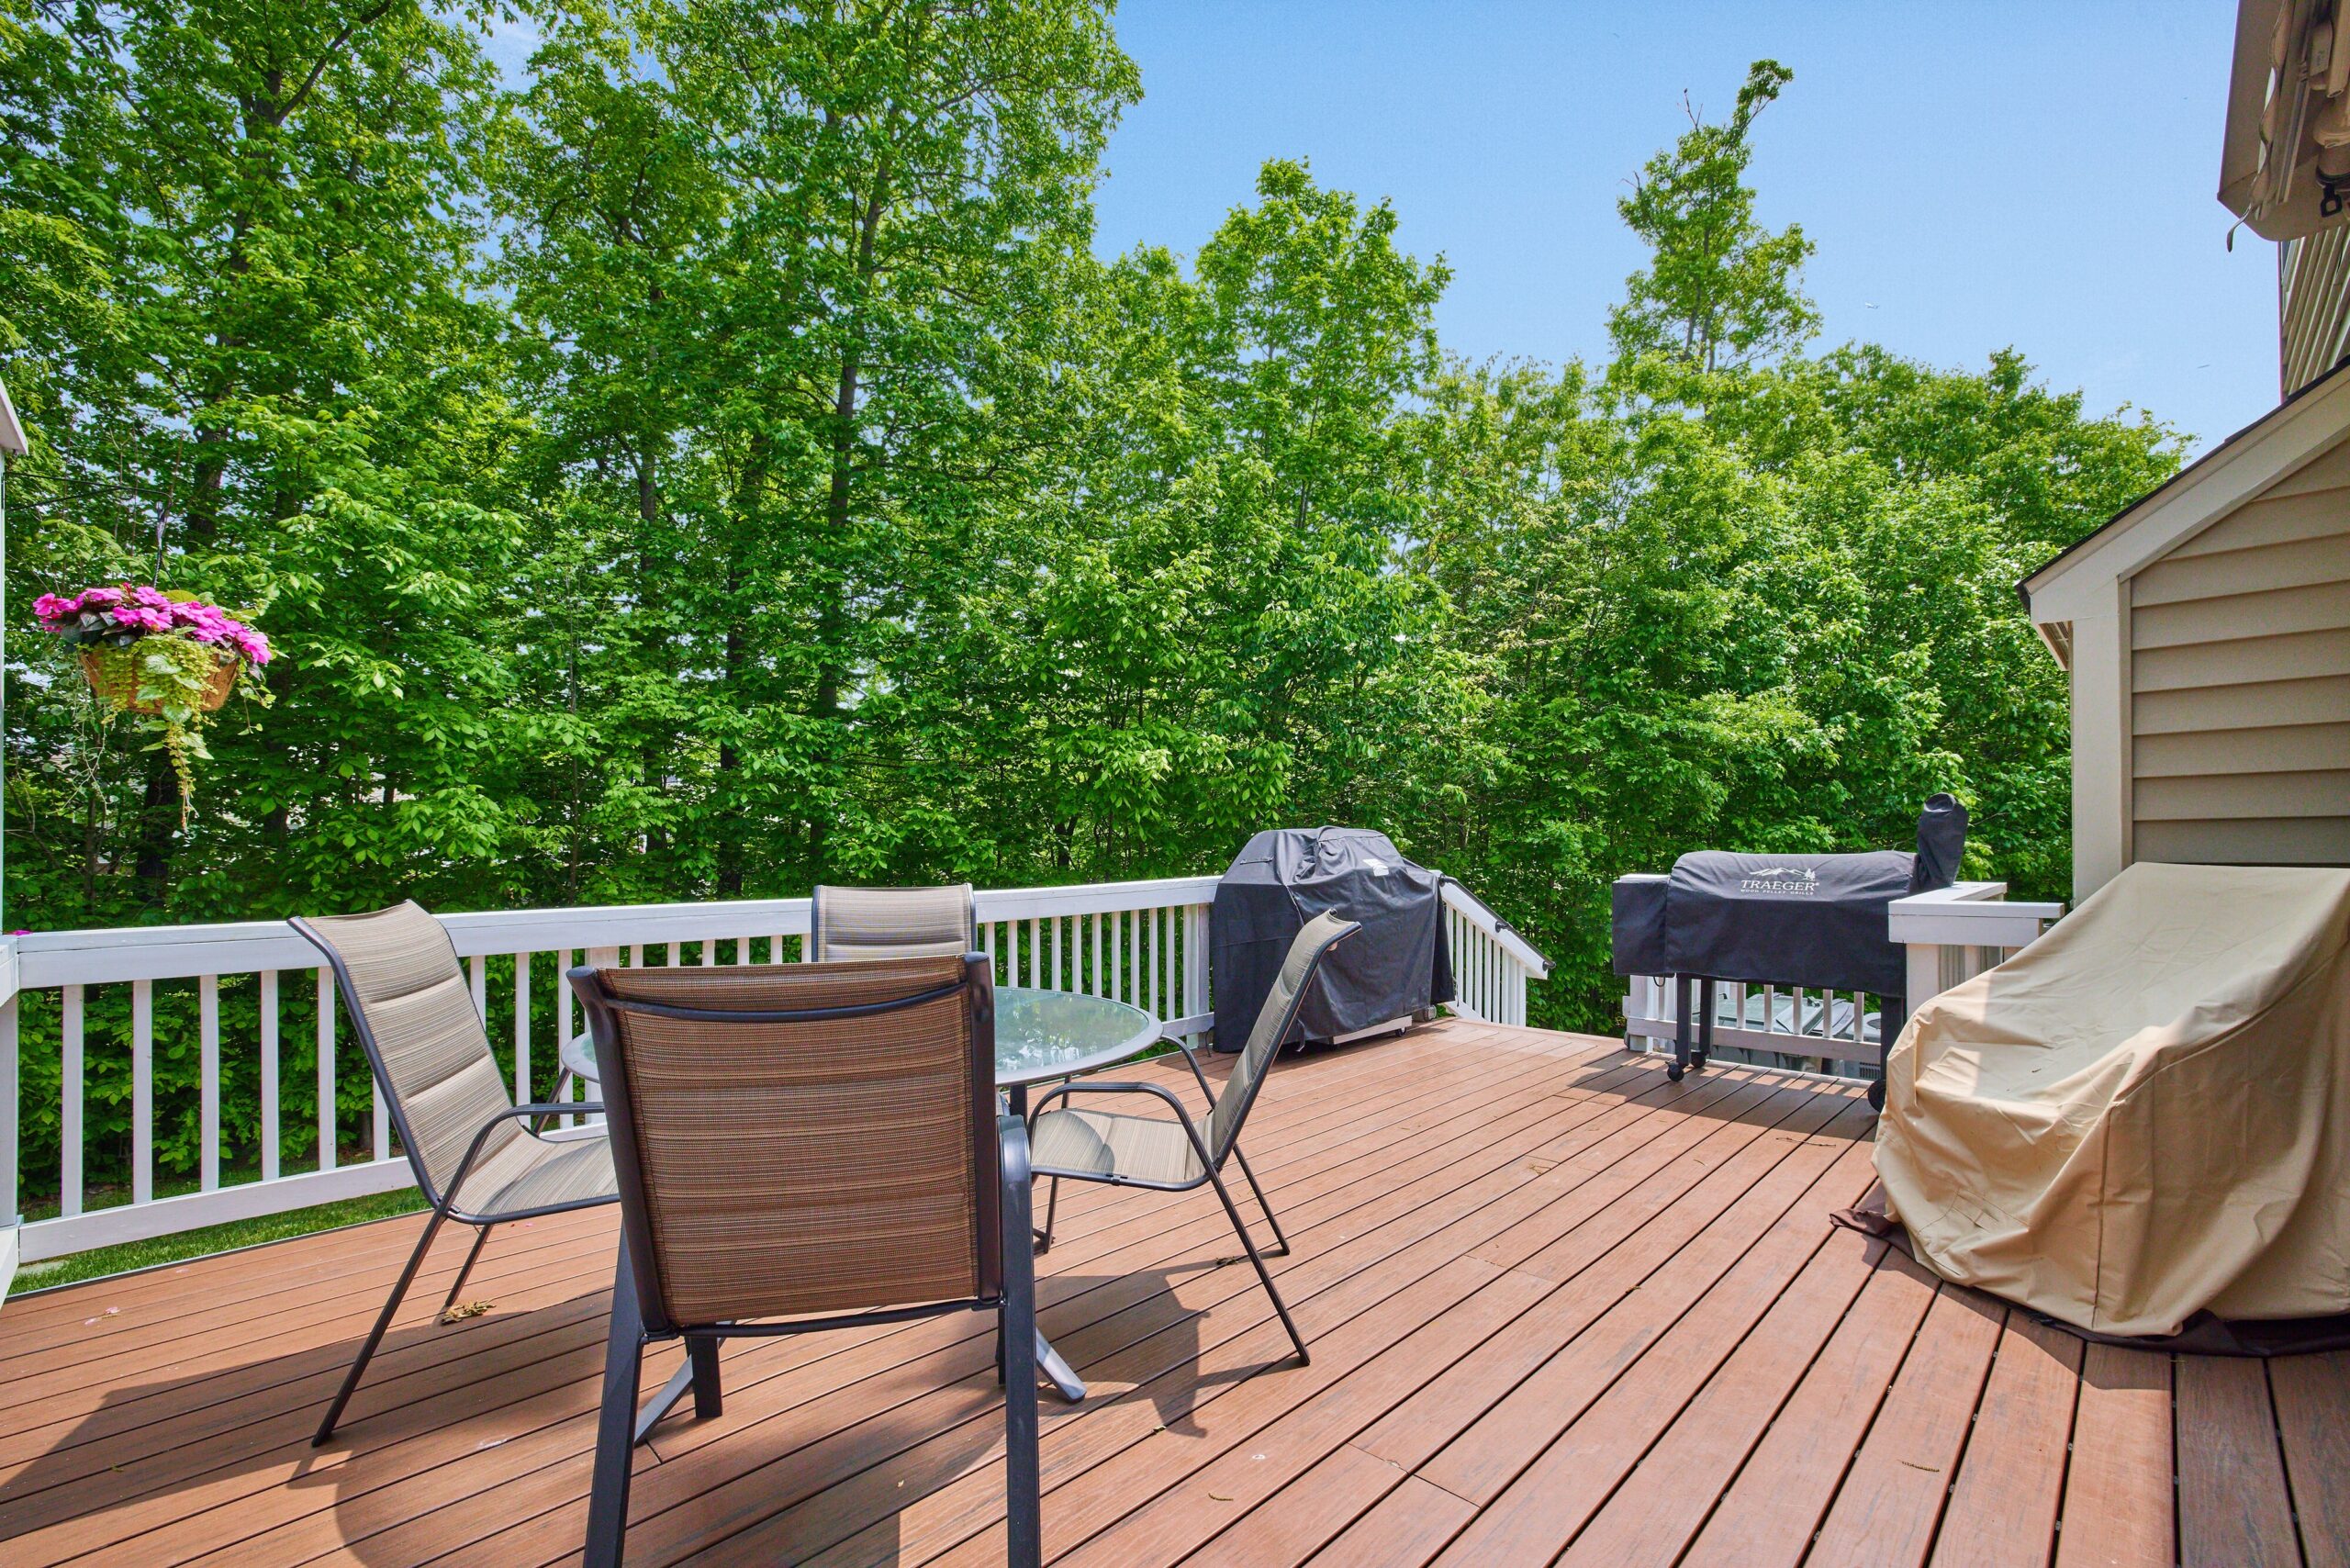 Professional exterior photo of 12030 Lake Dorian Drive, Bristow, VA - showing the large rear deck with patio furniture and 2 grills and green tree buffer beyond